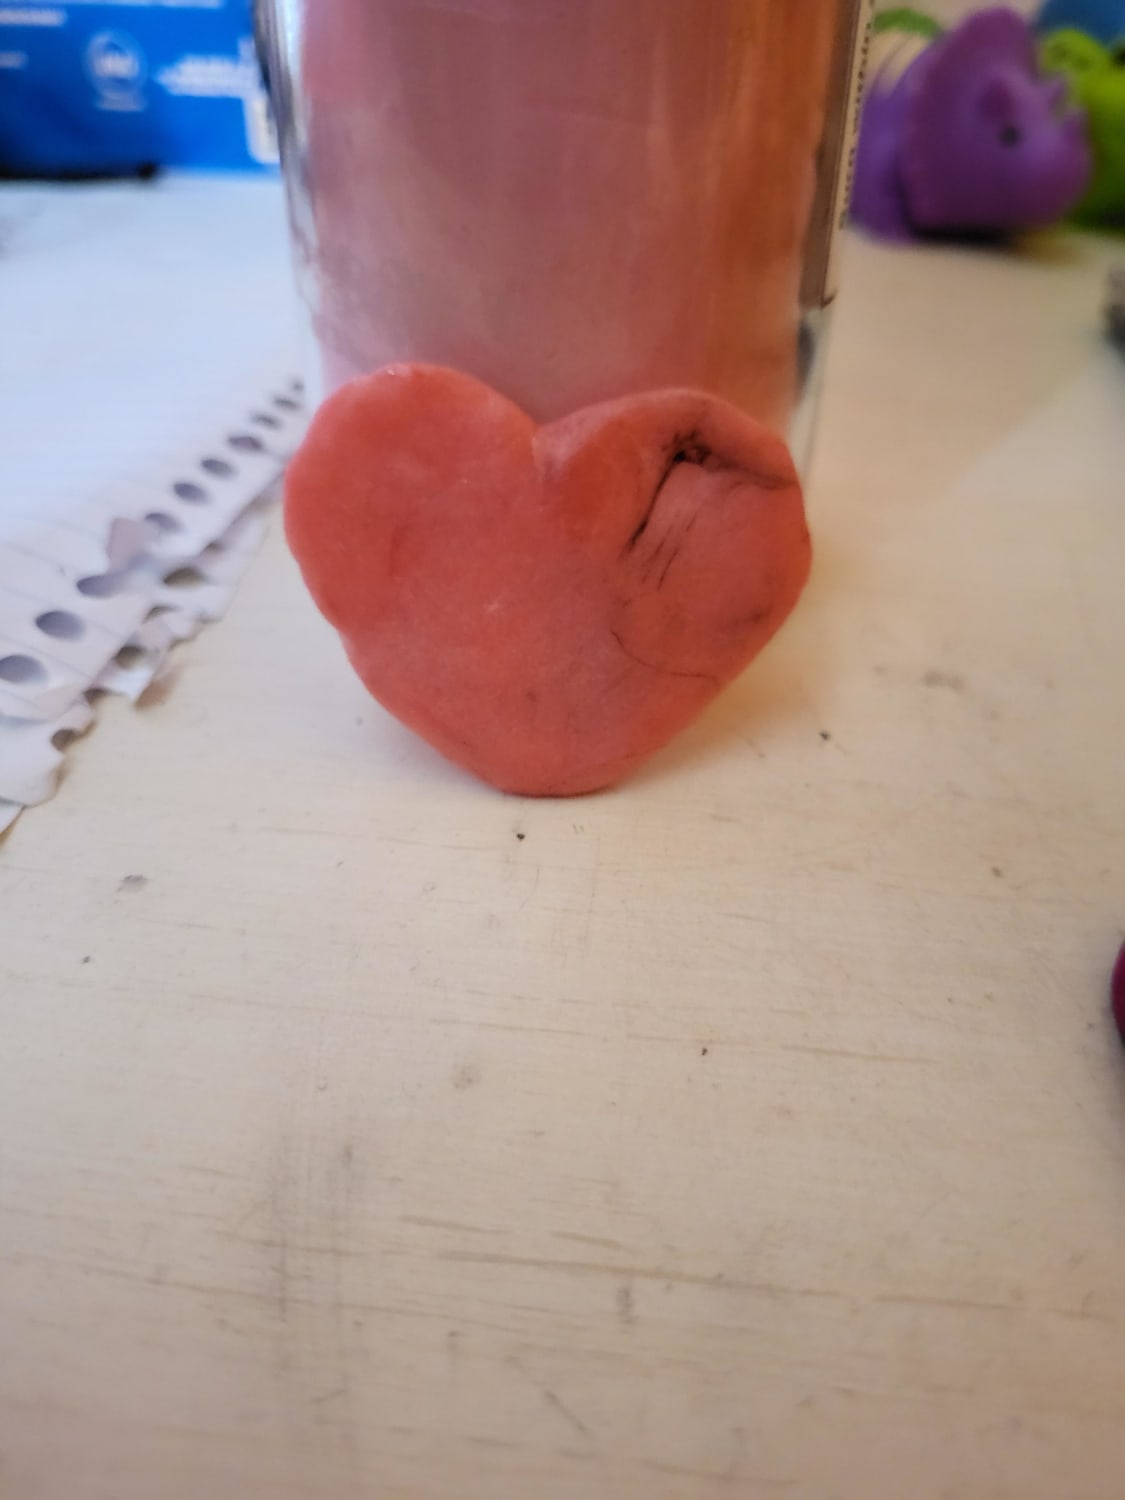 Had to Scrap Some Wax From Aphrodite's Candle, so I Made it Into a Heart for Her!